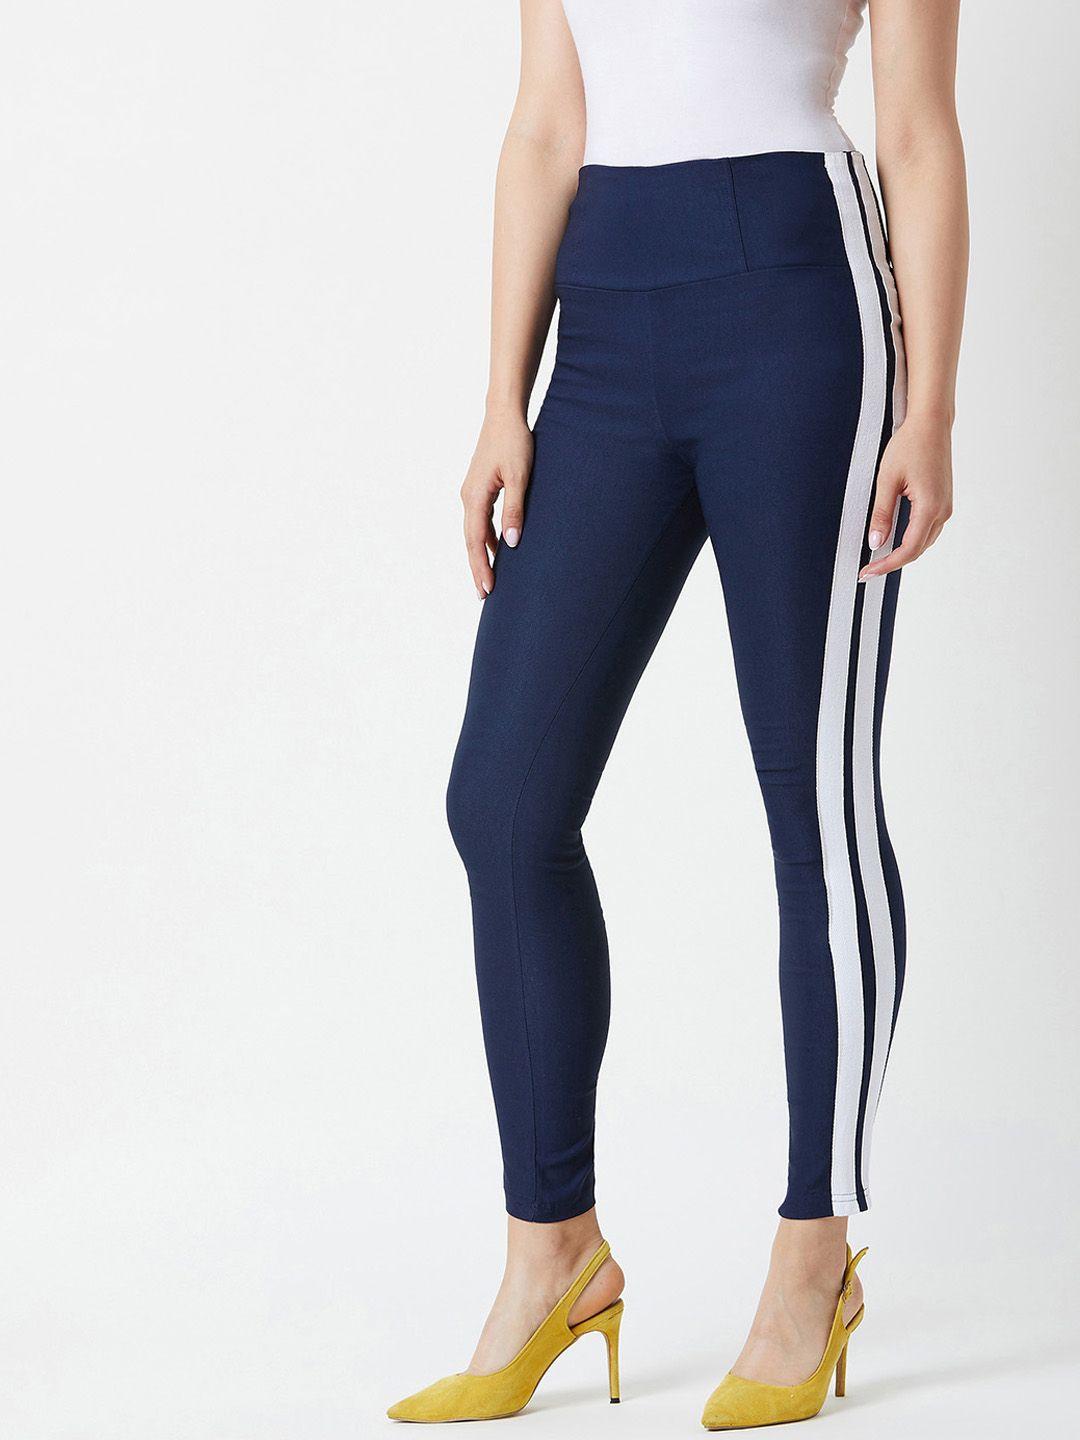 miss-chase-women-navy-blue-solid-skinny-fit-high-waist-treggings